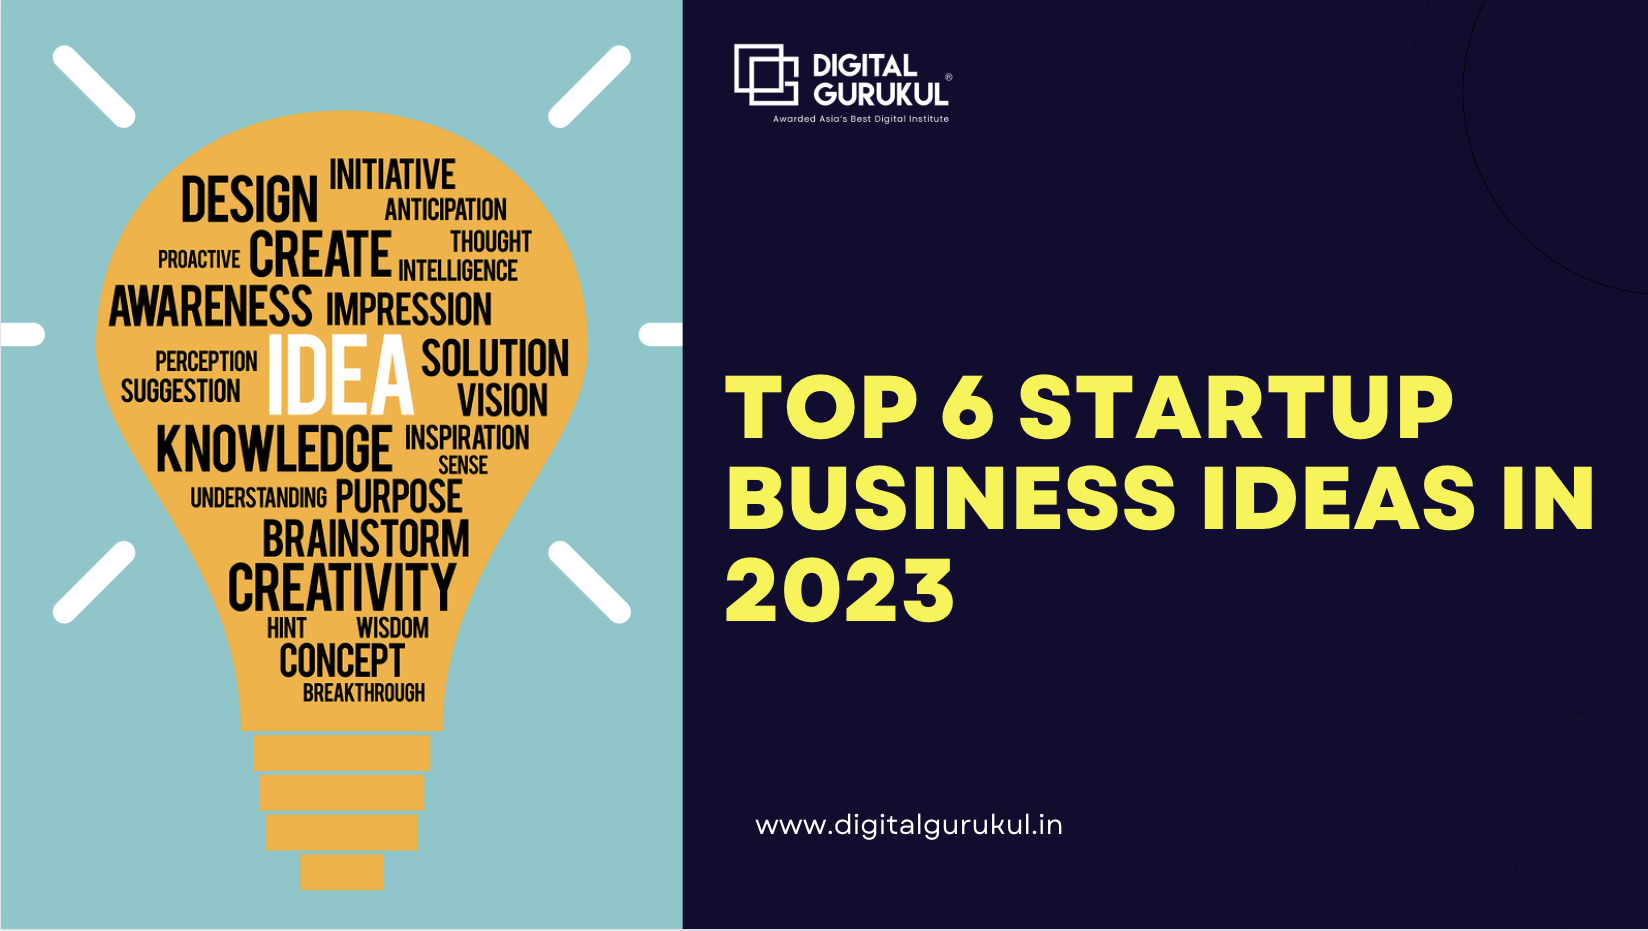 Top 6 startup business ideas in 2023